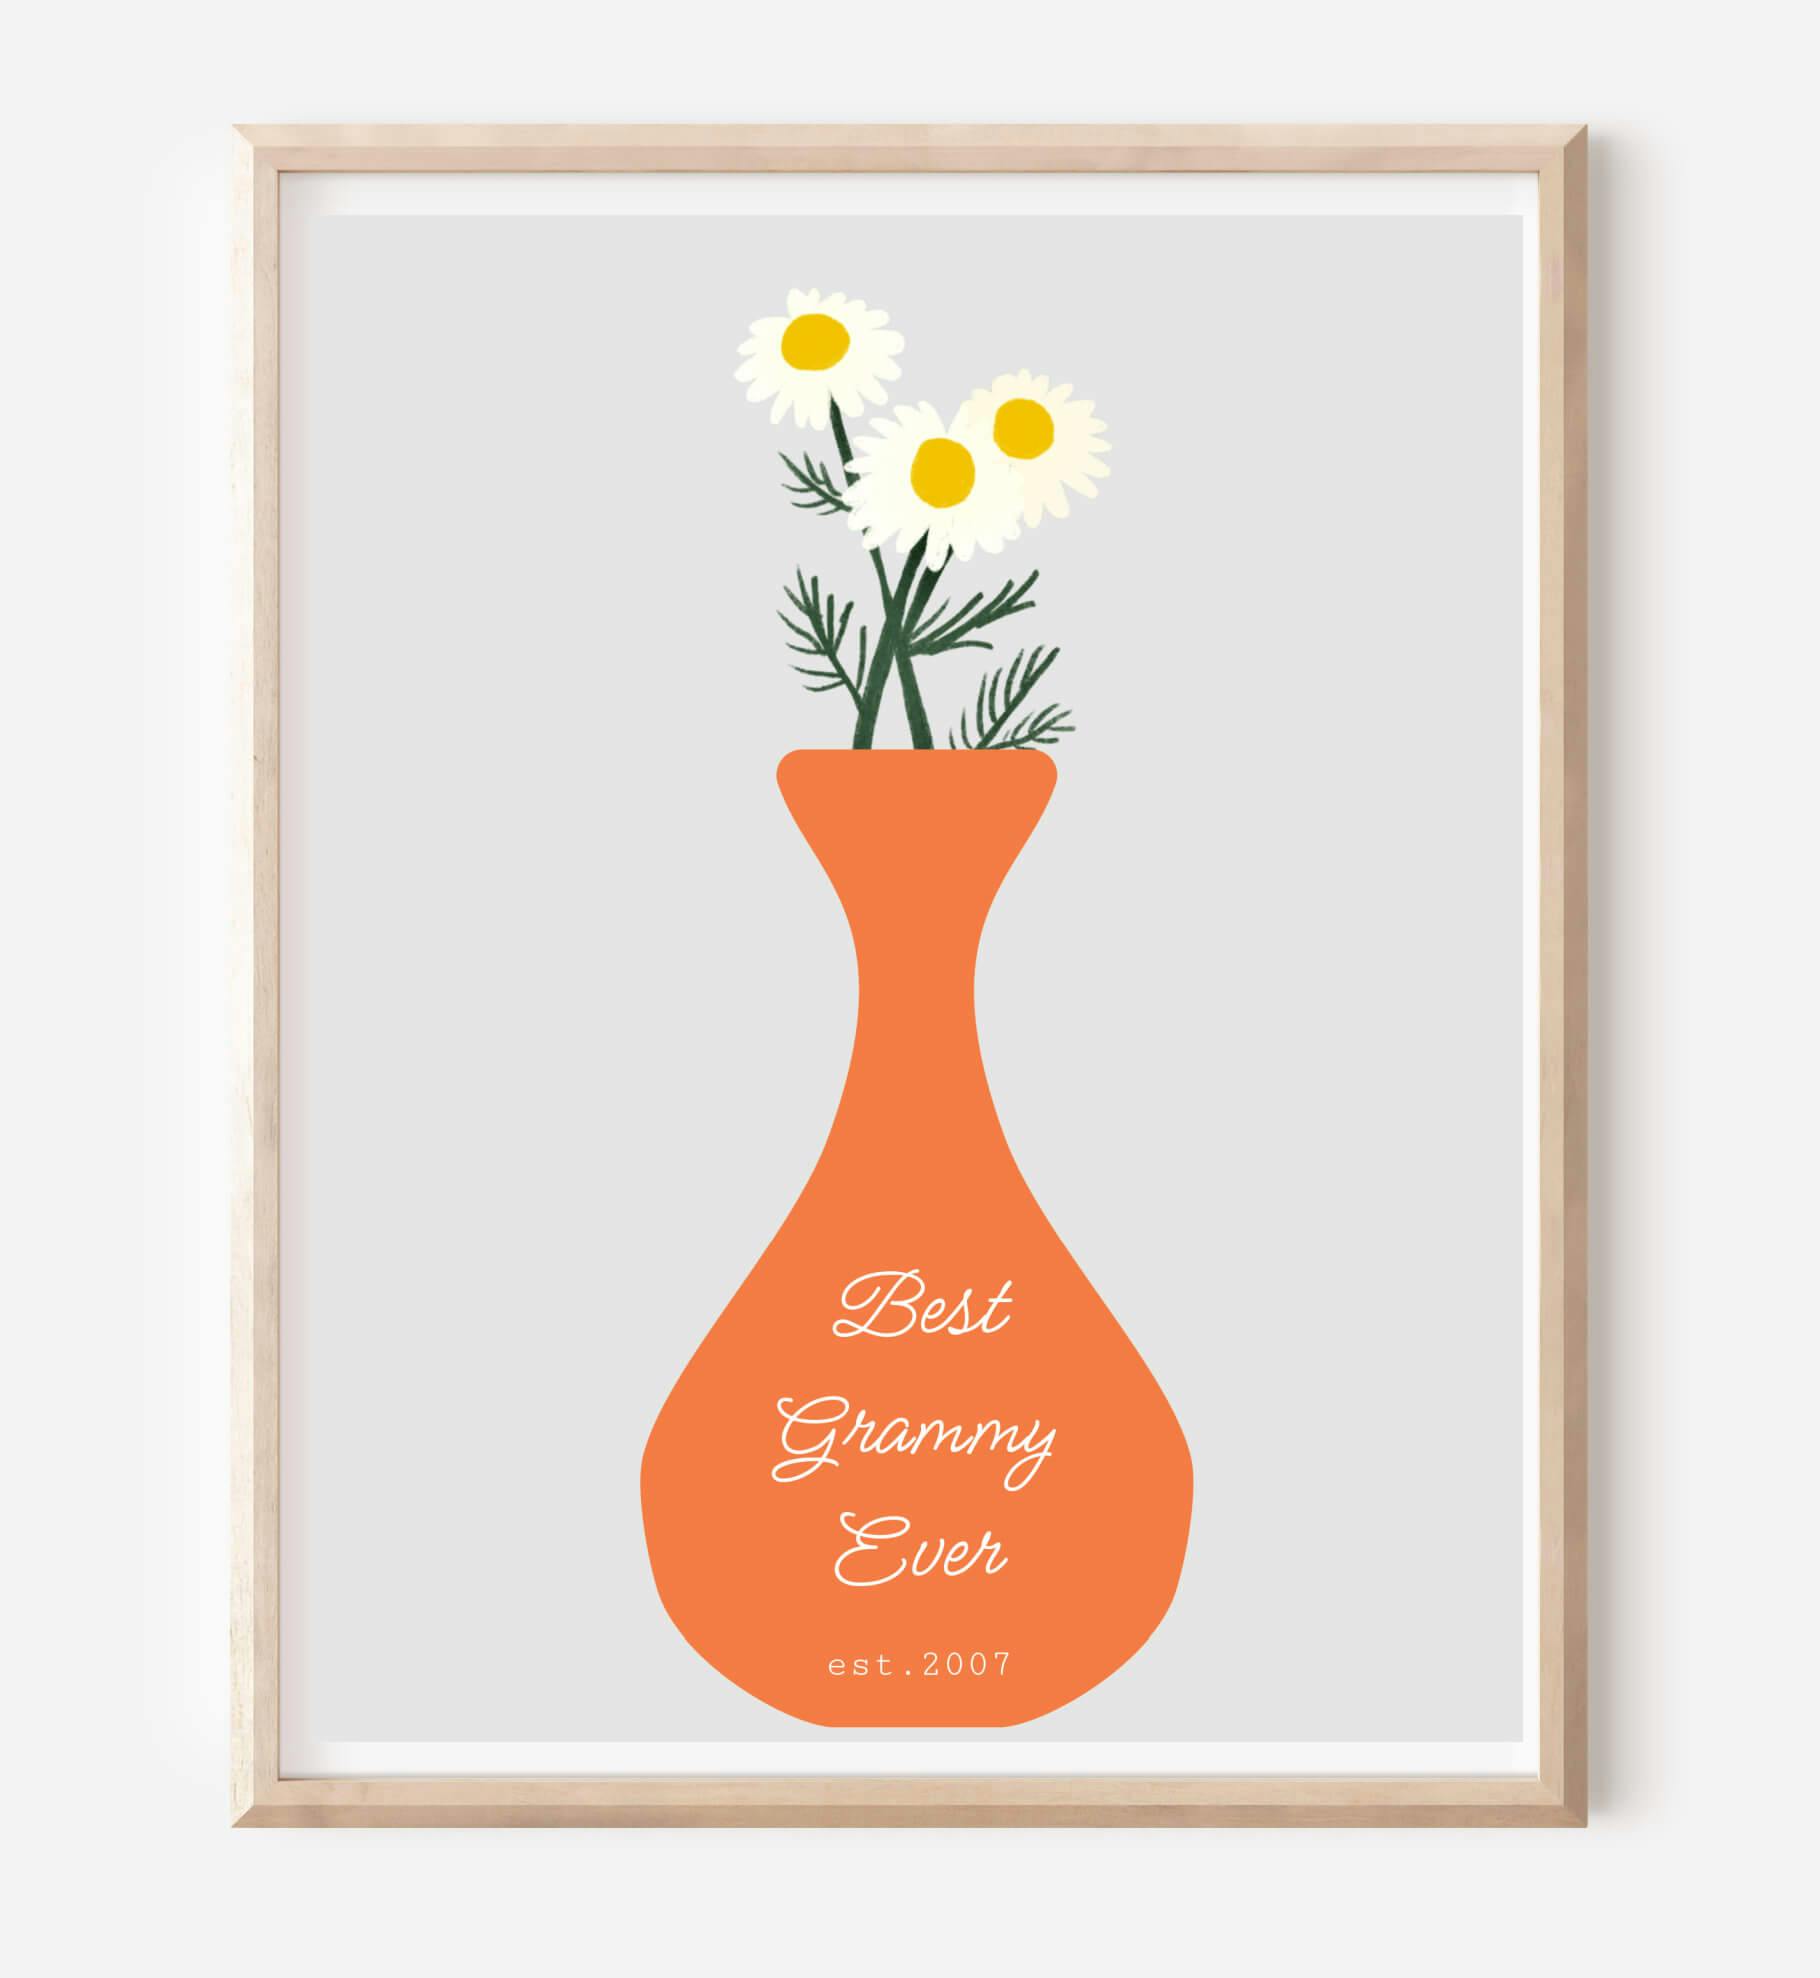 Personalized Grandma Vase of Daisies Art Print Gift - undefined - bright side girl shoppe